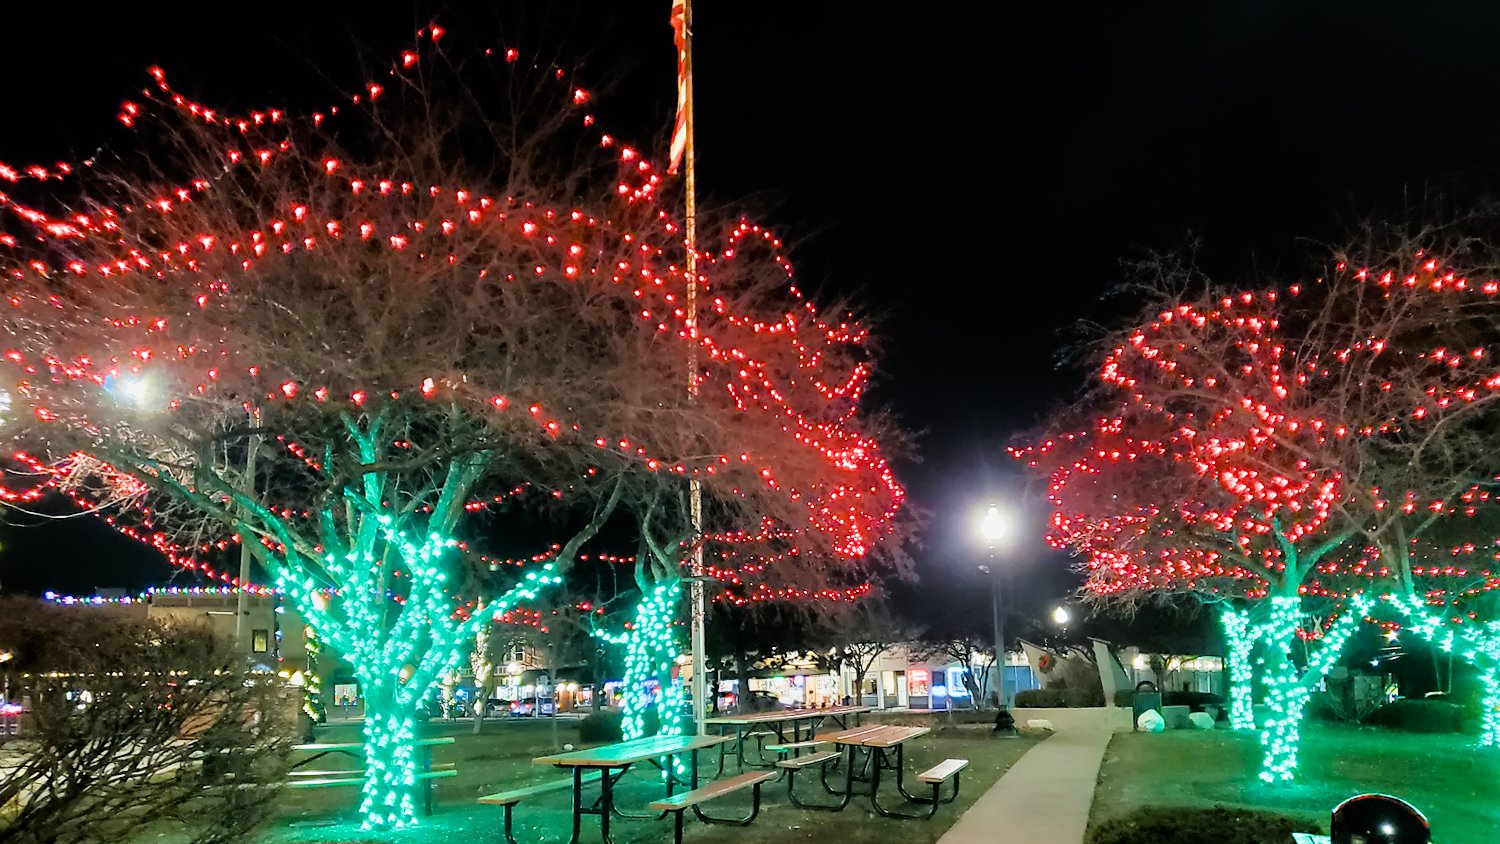 Red and green lights on trees in Depot Park.